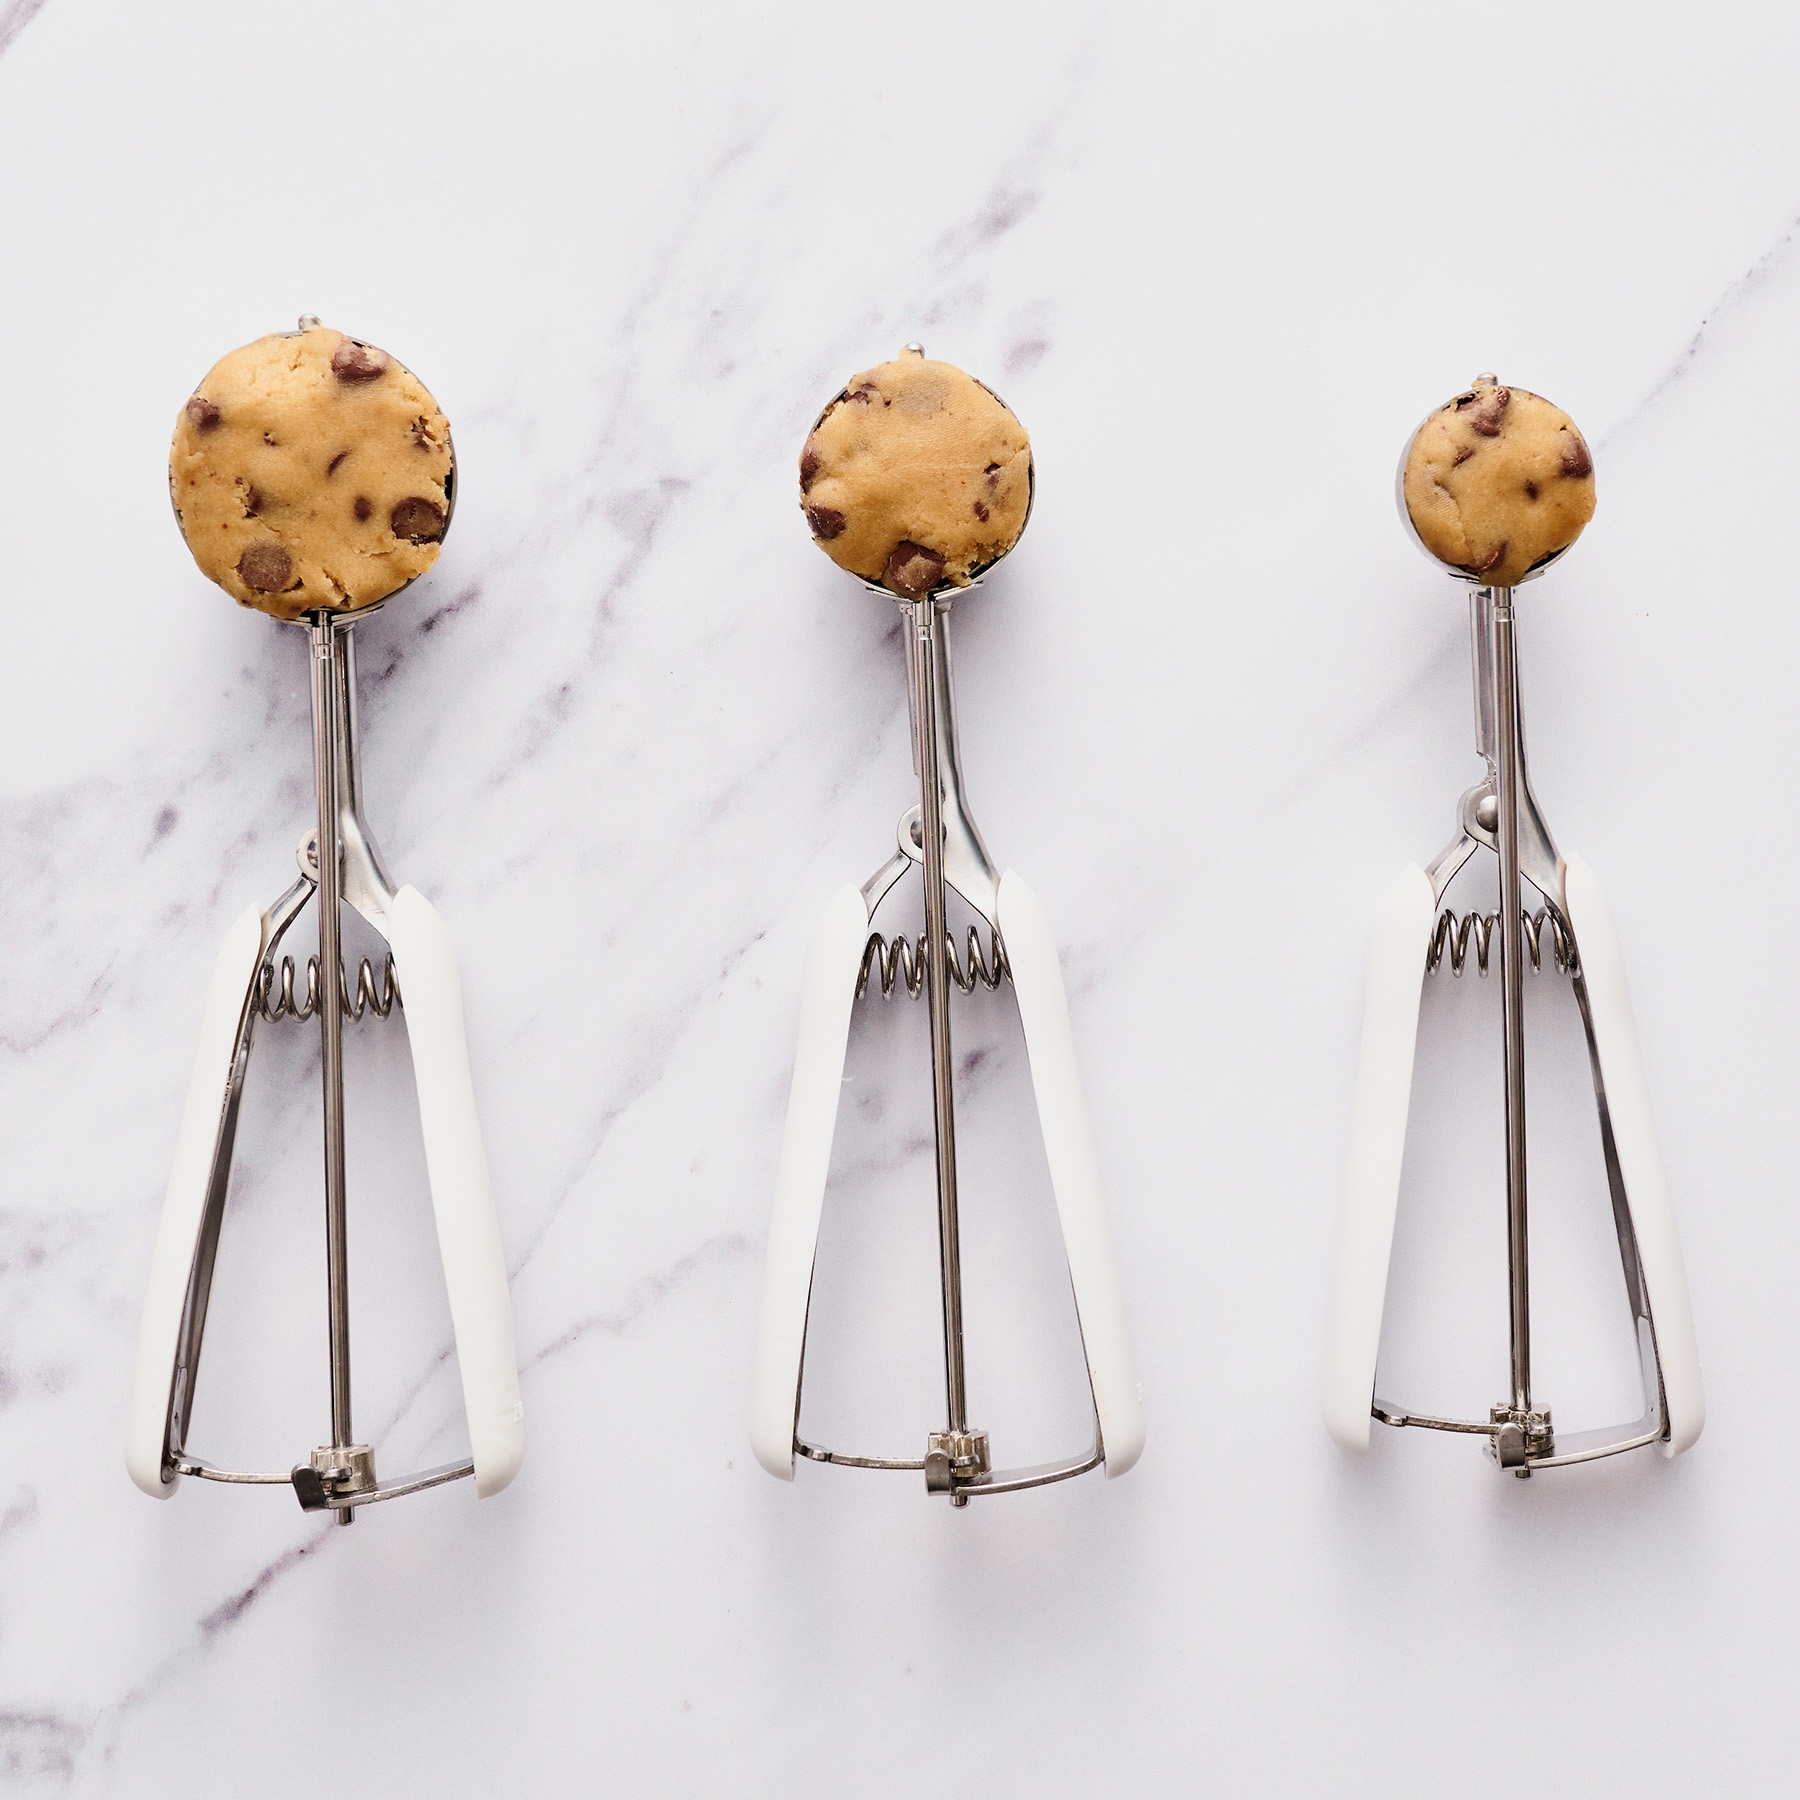 three different sizes of cookie scoops filled with cookie dough